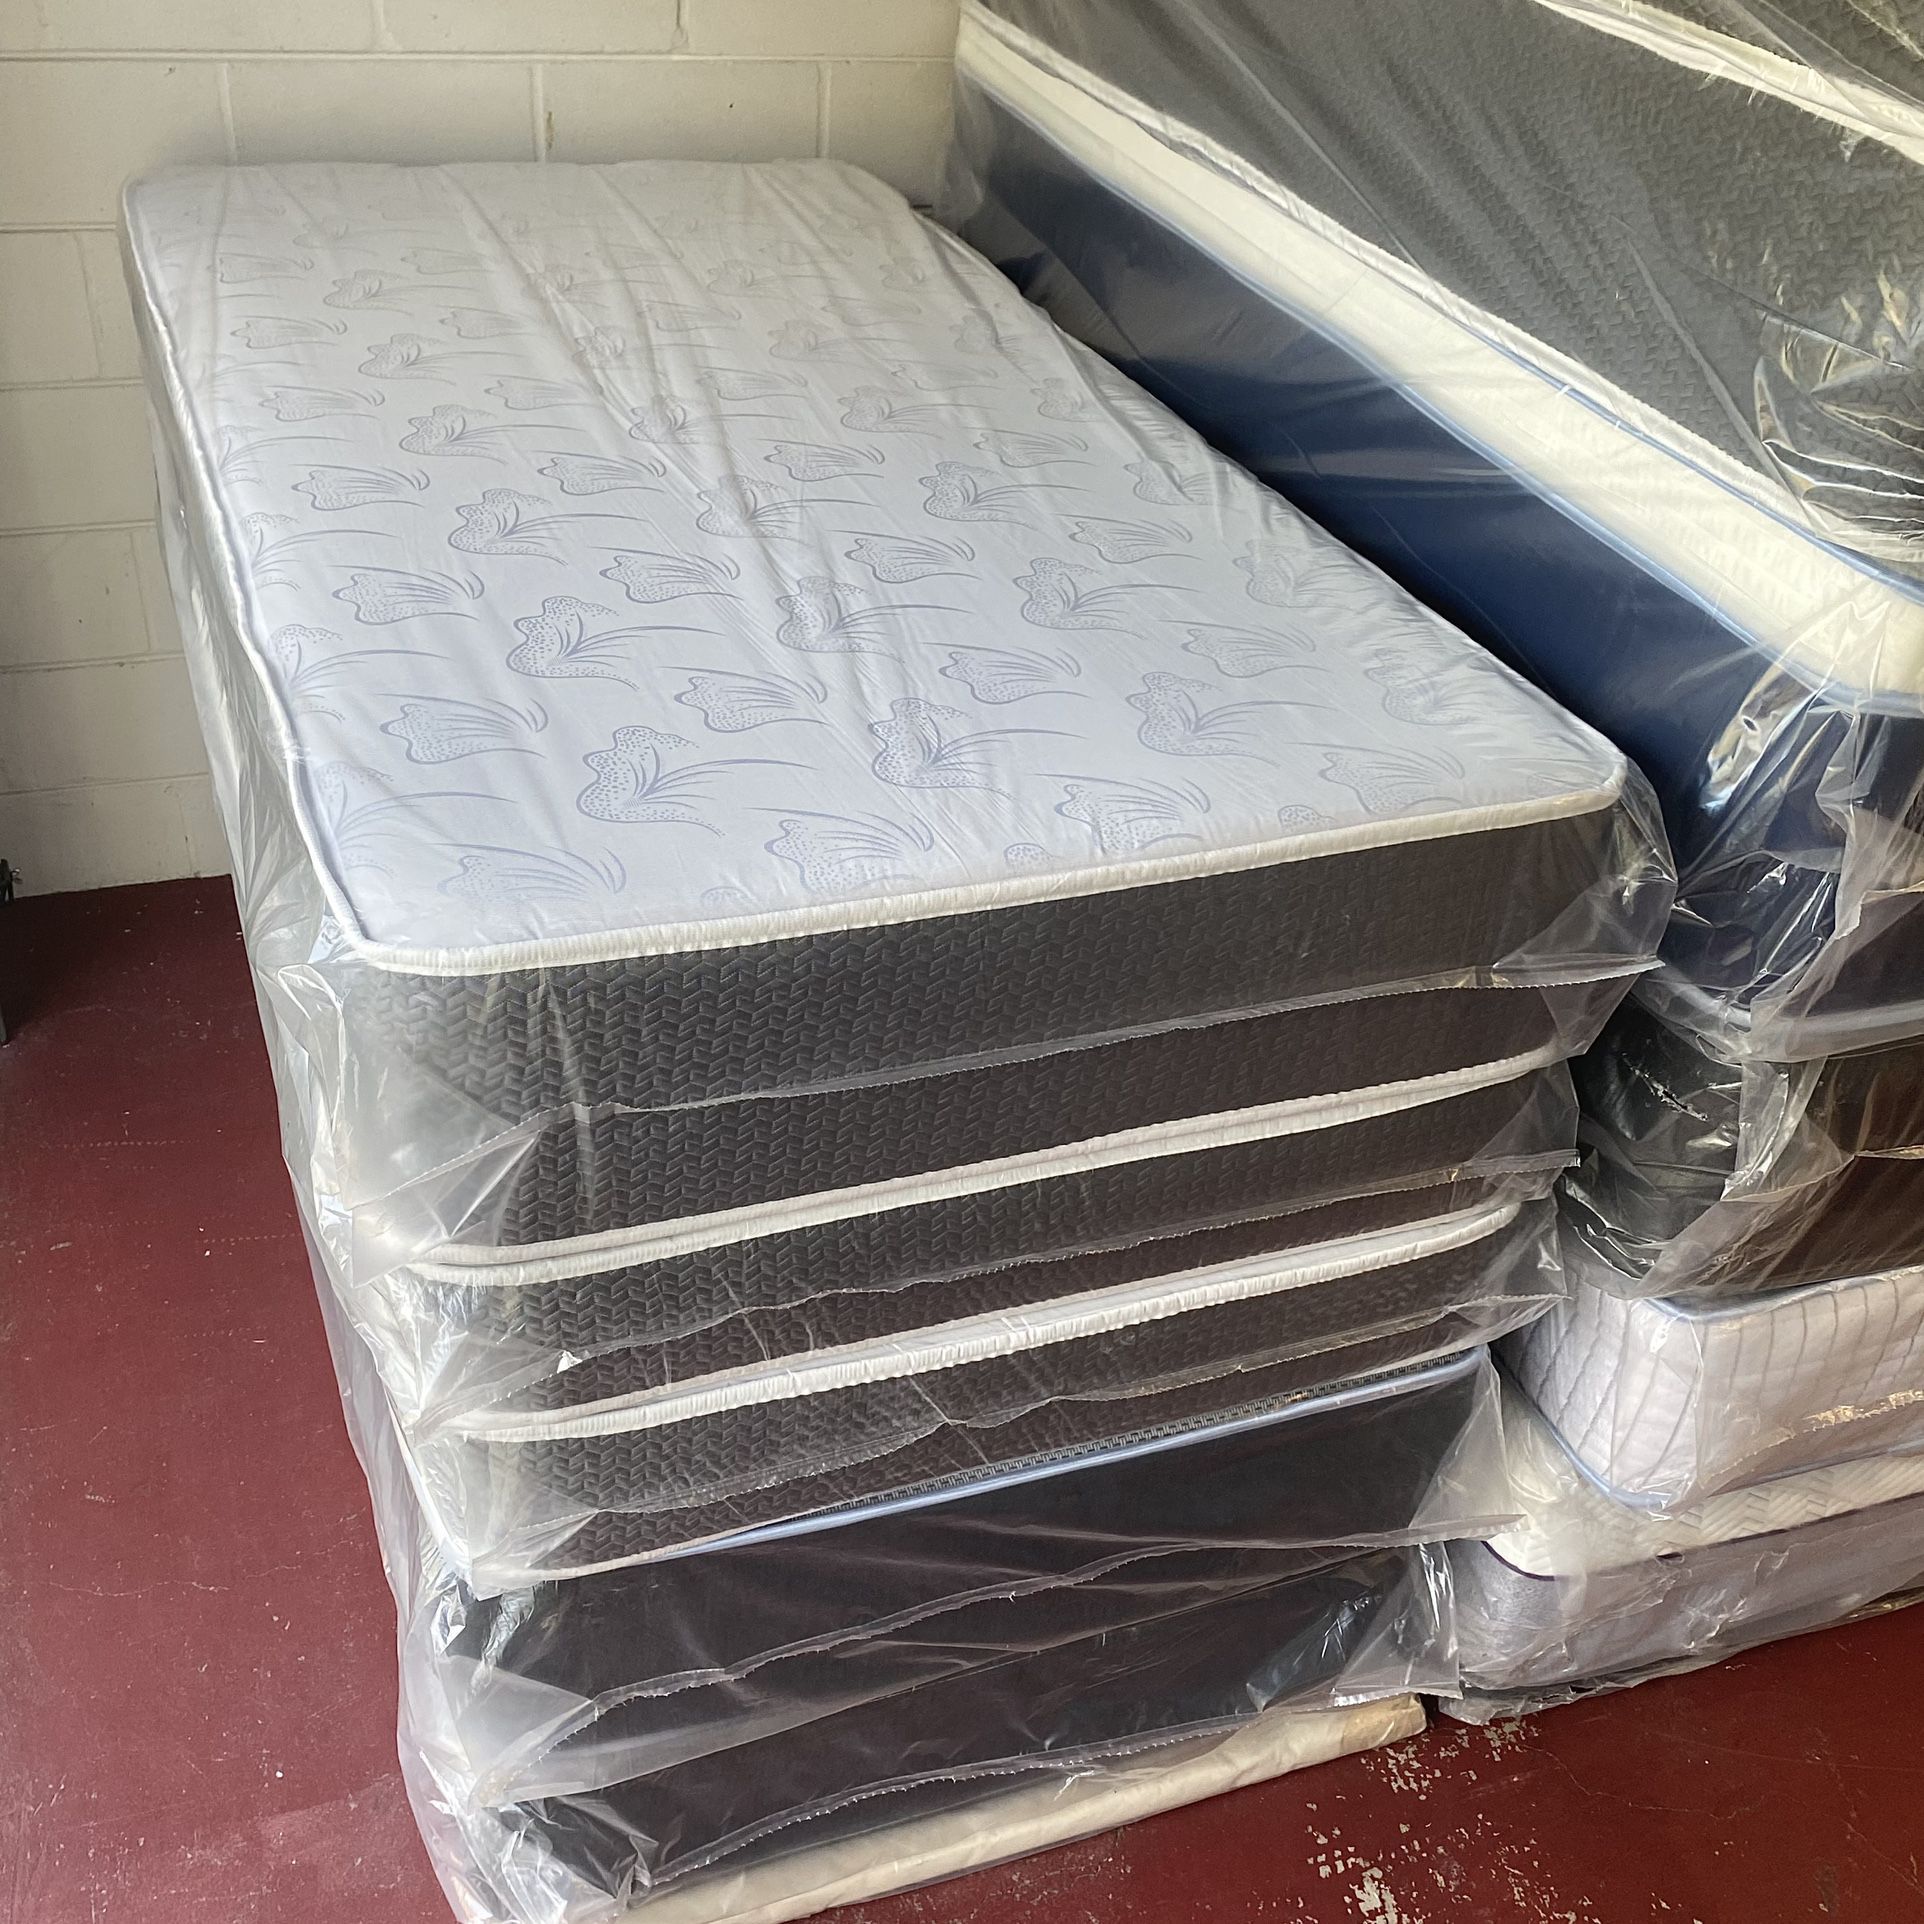 Twin Size Mattress 10” Inches Thick New From Factory Also Available in: Full, Queen, King Same Day Delivery